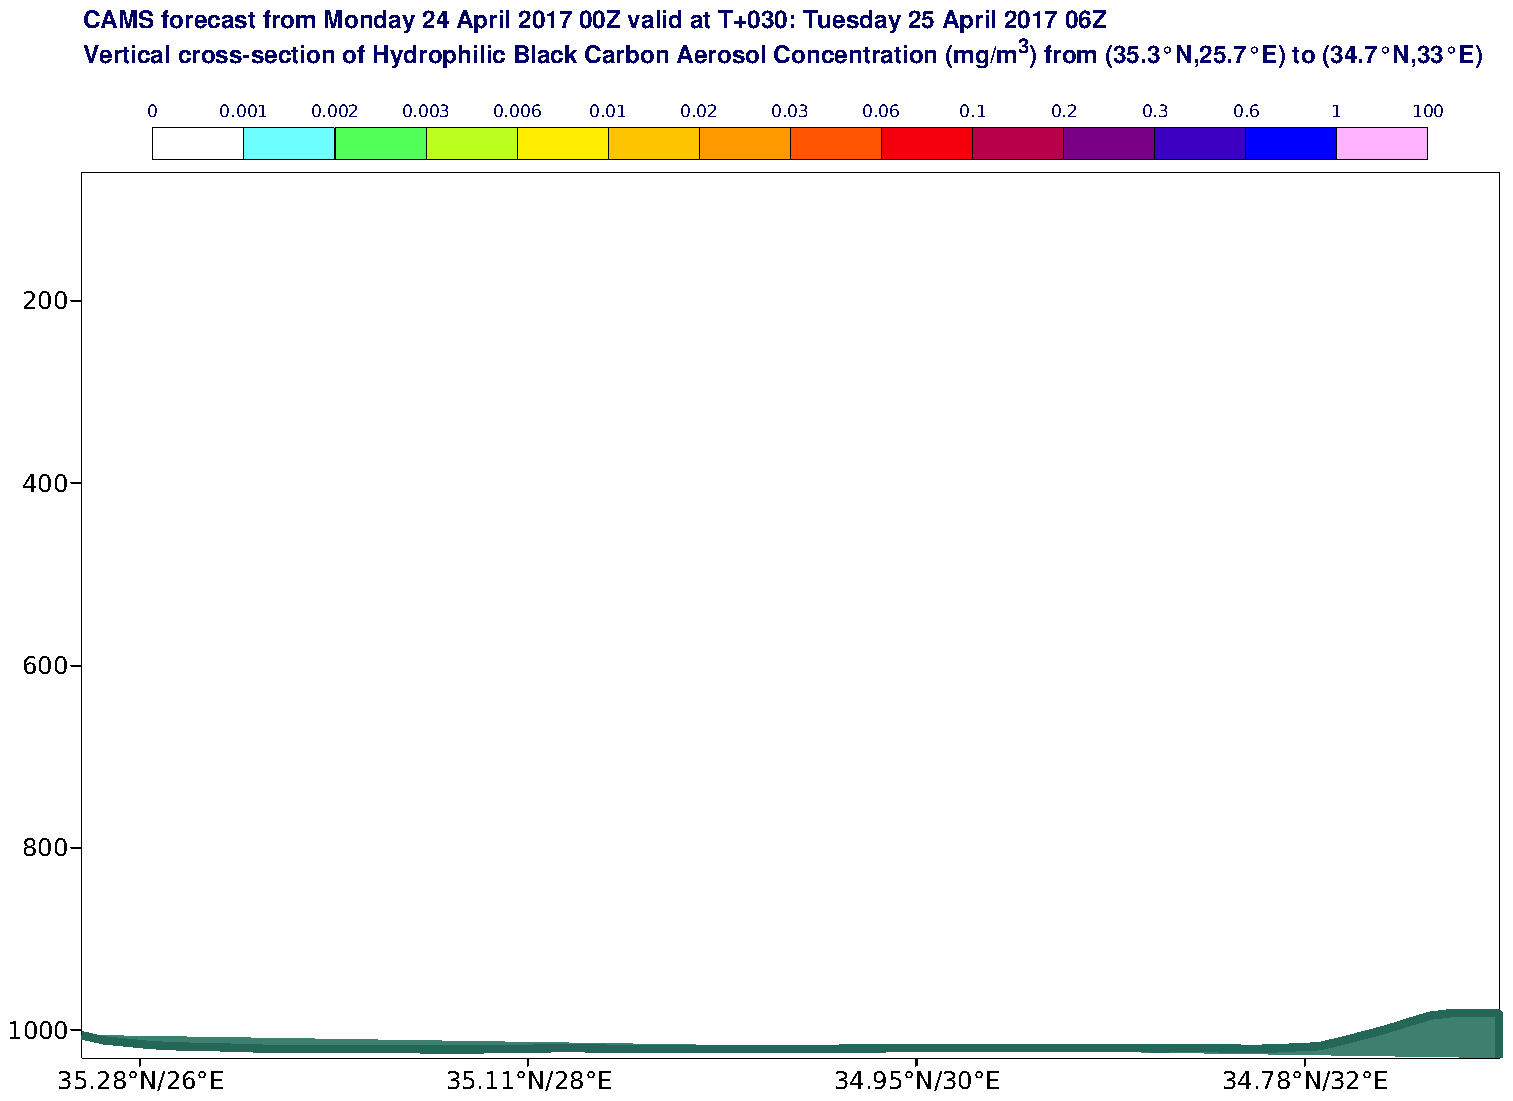 Vertical cross-section of Hydrophilic Black Carbon Aerosol Concentration (mg/m3) valid at T30 - 2017-04-25 06:00